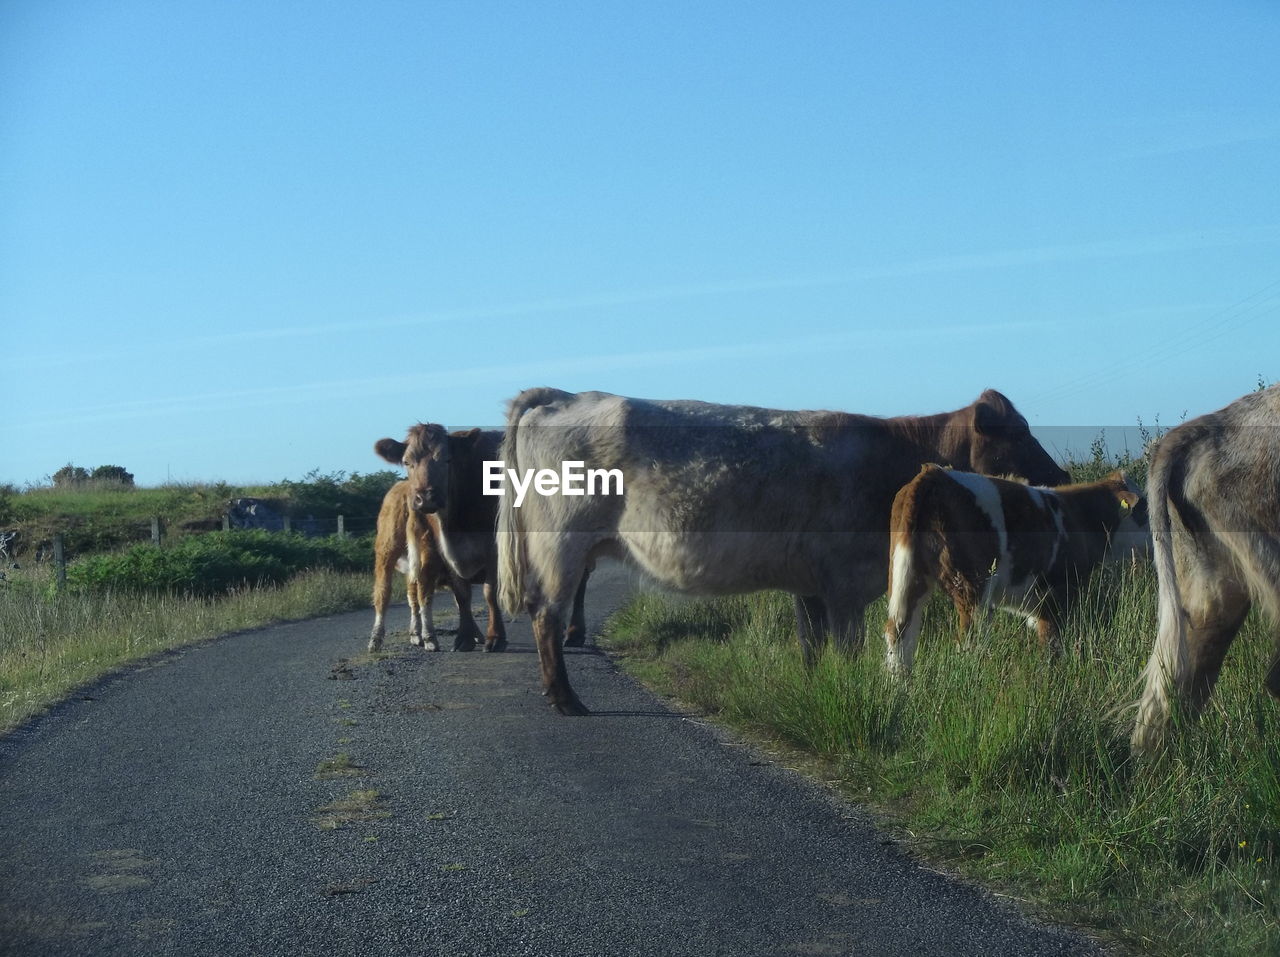 Cow herd standing partially on a country street with cow directly looking at the camera